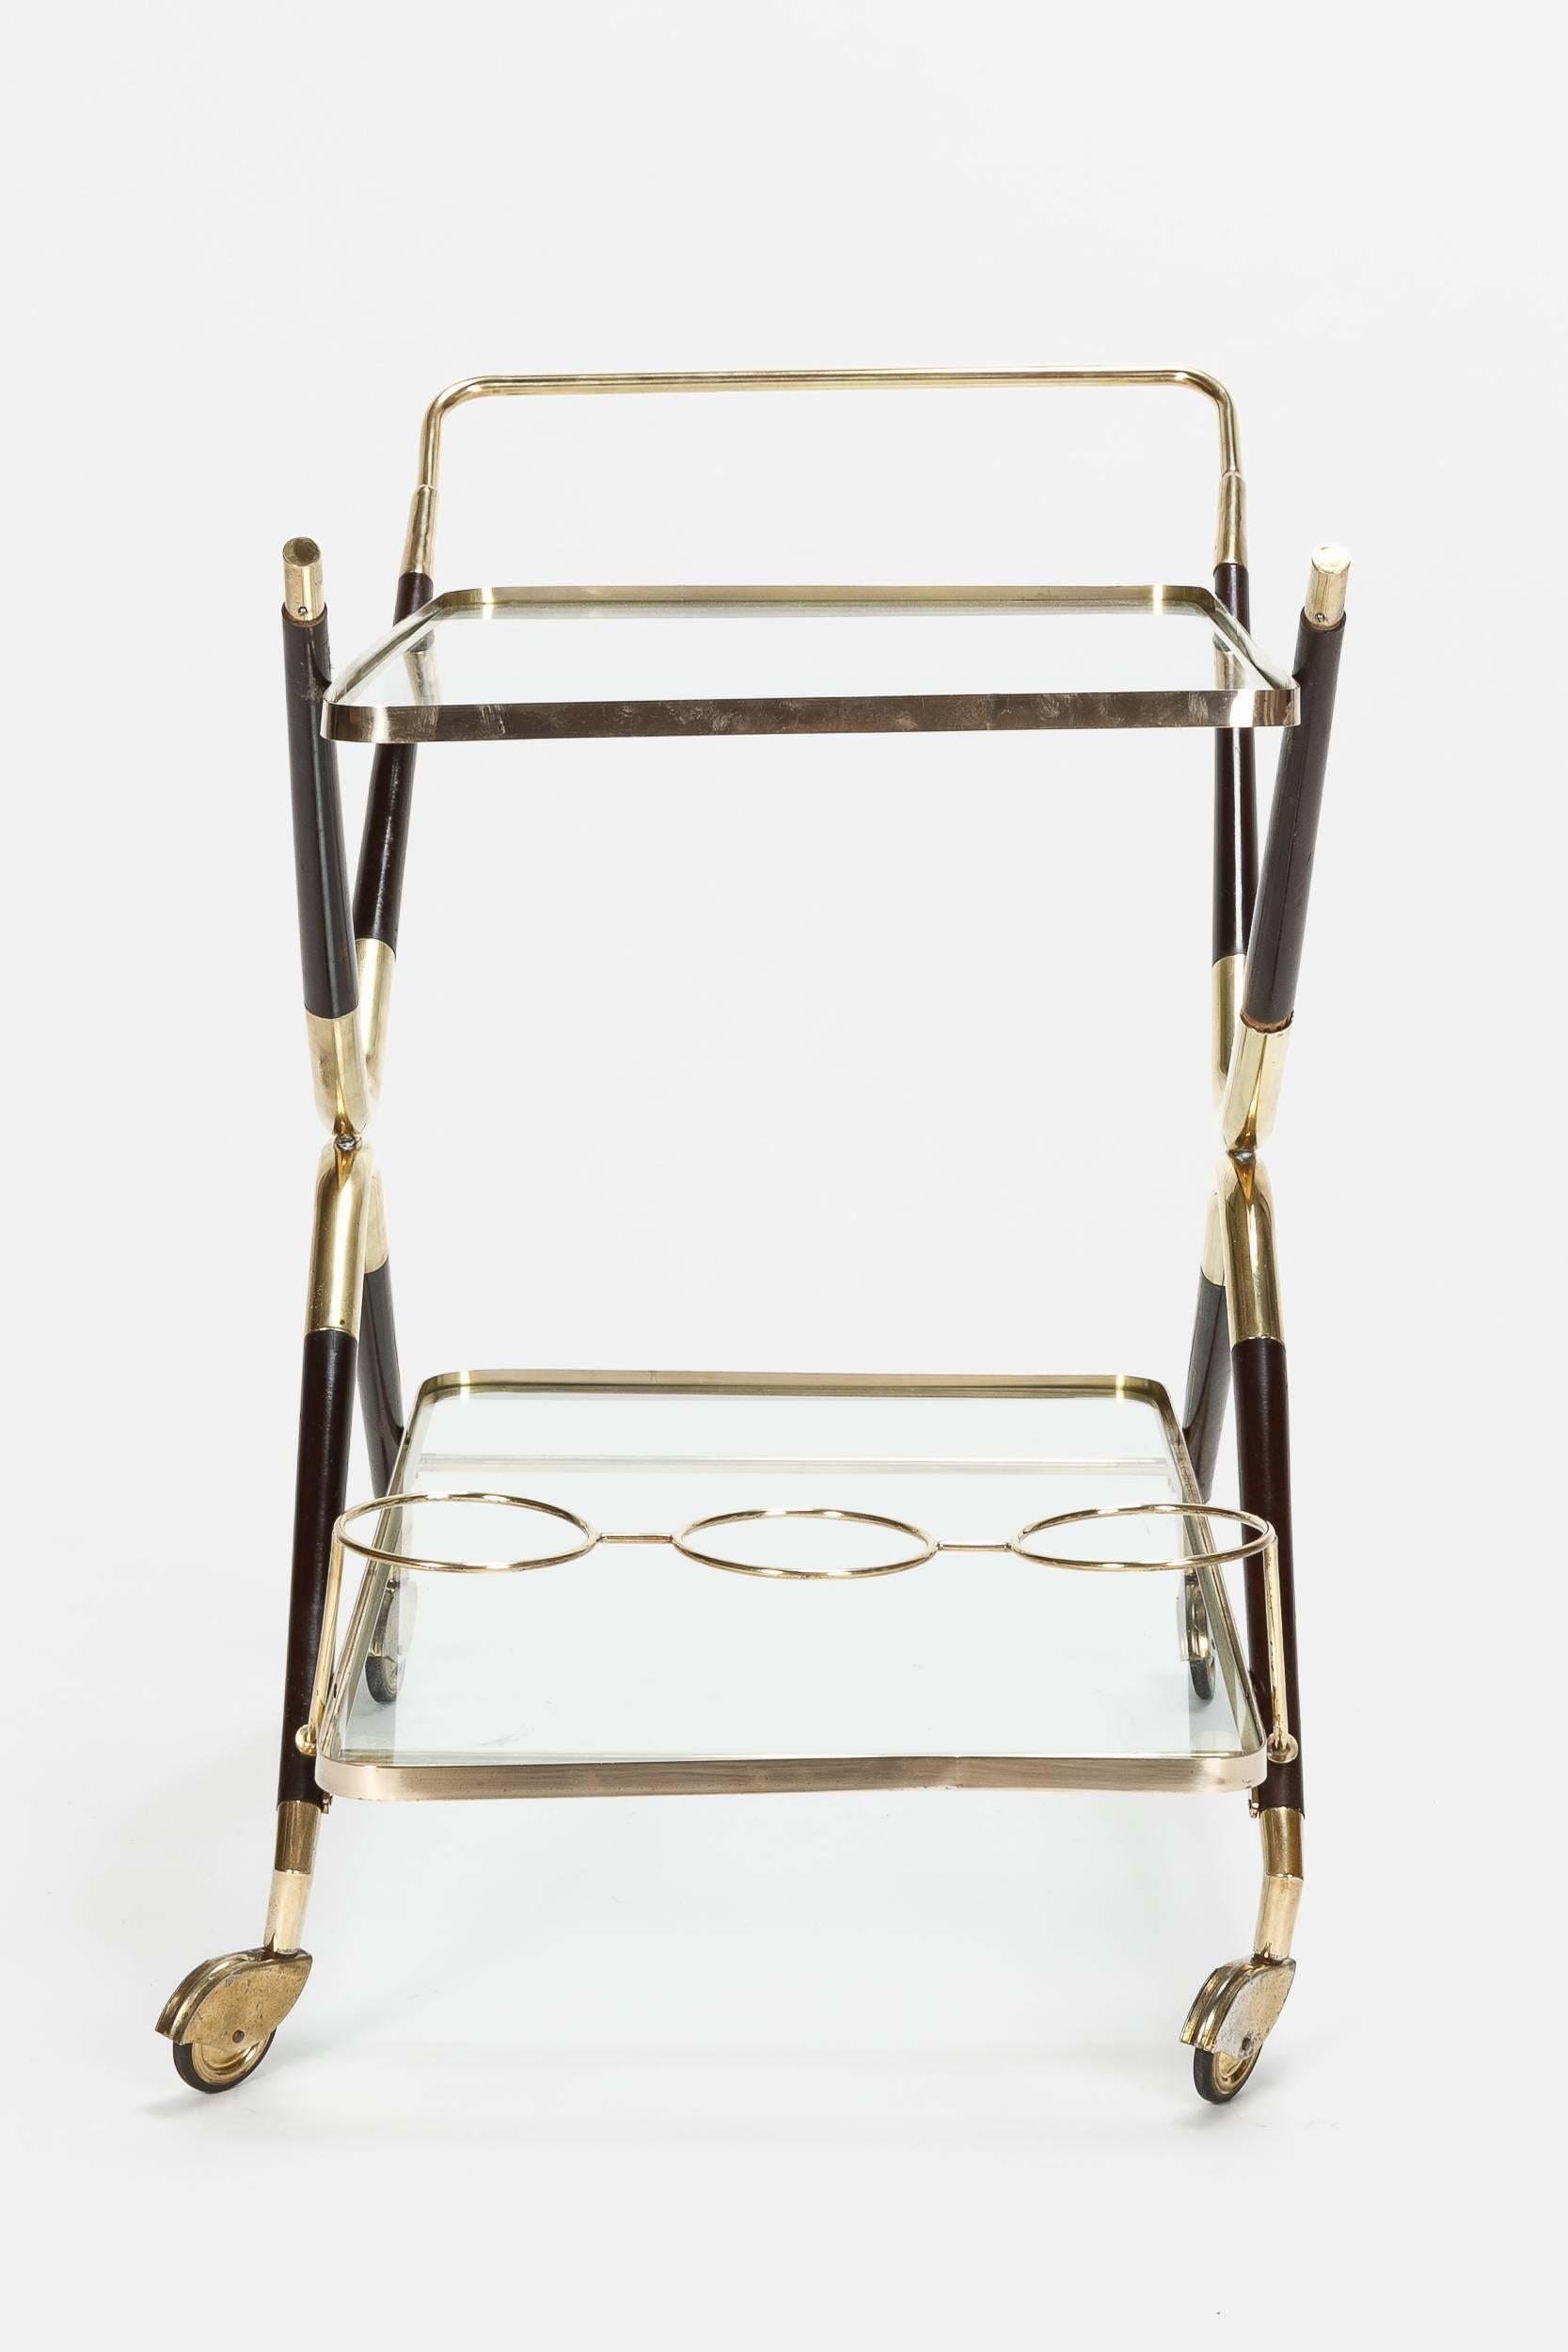 A stunning Cesare Lacca bar cart, manufactured in Italy in the 1950s. Very elegant and reduced shape with a frame of solid brass and shiny lacquered black mahogany, shelves made of original glass. Three bottle holder integrated on the lower shelf.